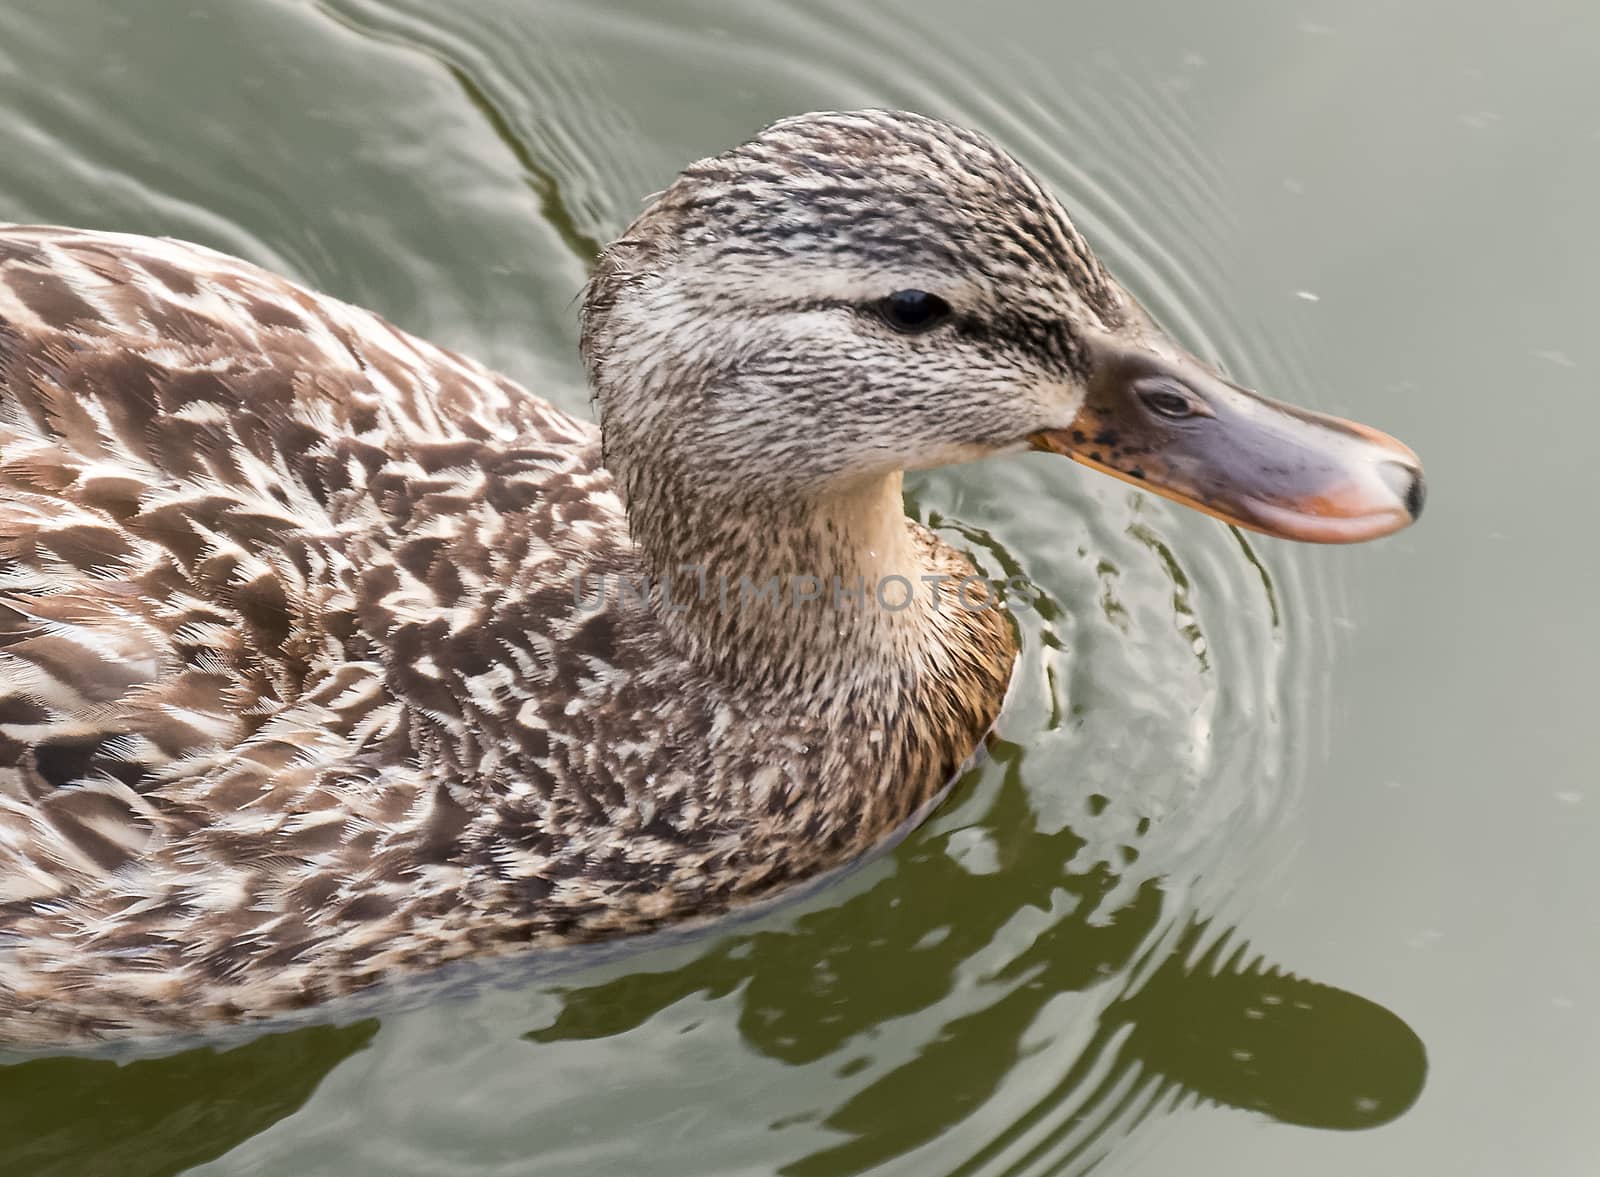 A close-up shot of a female duck swimming in a small pond.